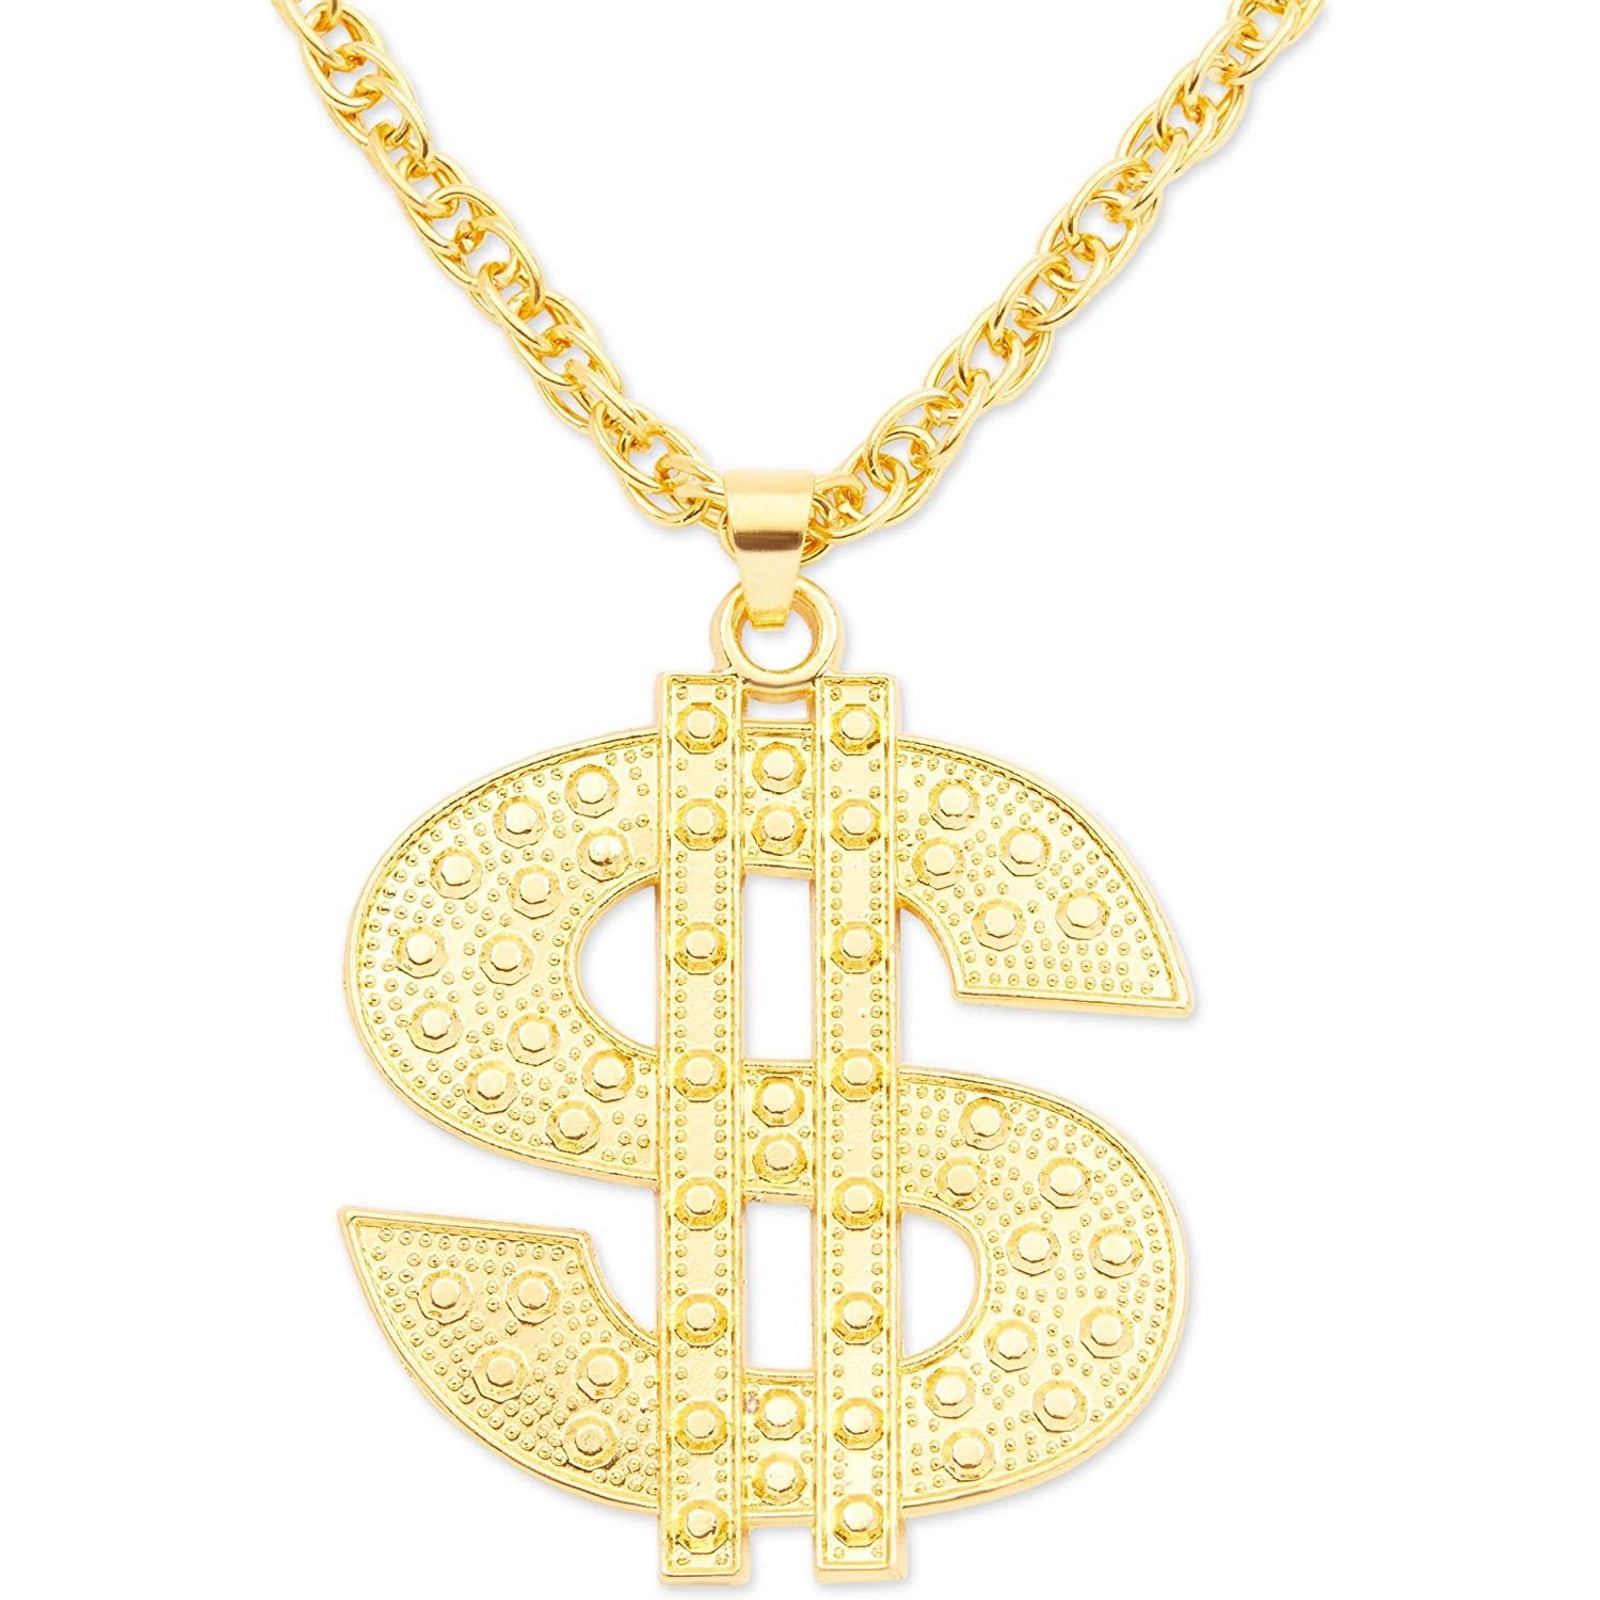 Men's Hip Hop Gold Round Crystal Dollar Sign $ Stainless Steel Pendant Necklaces